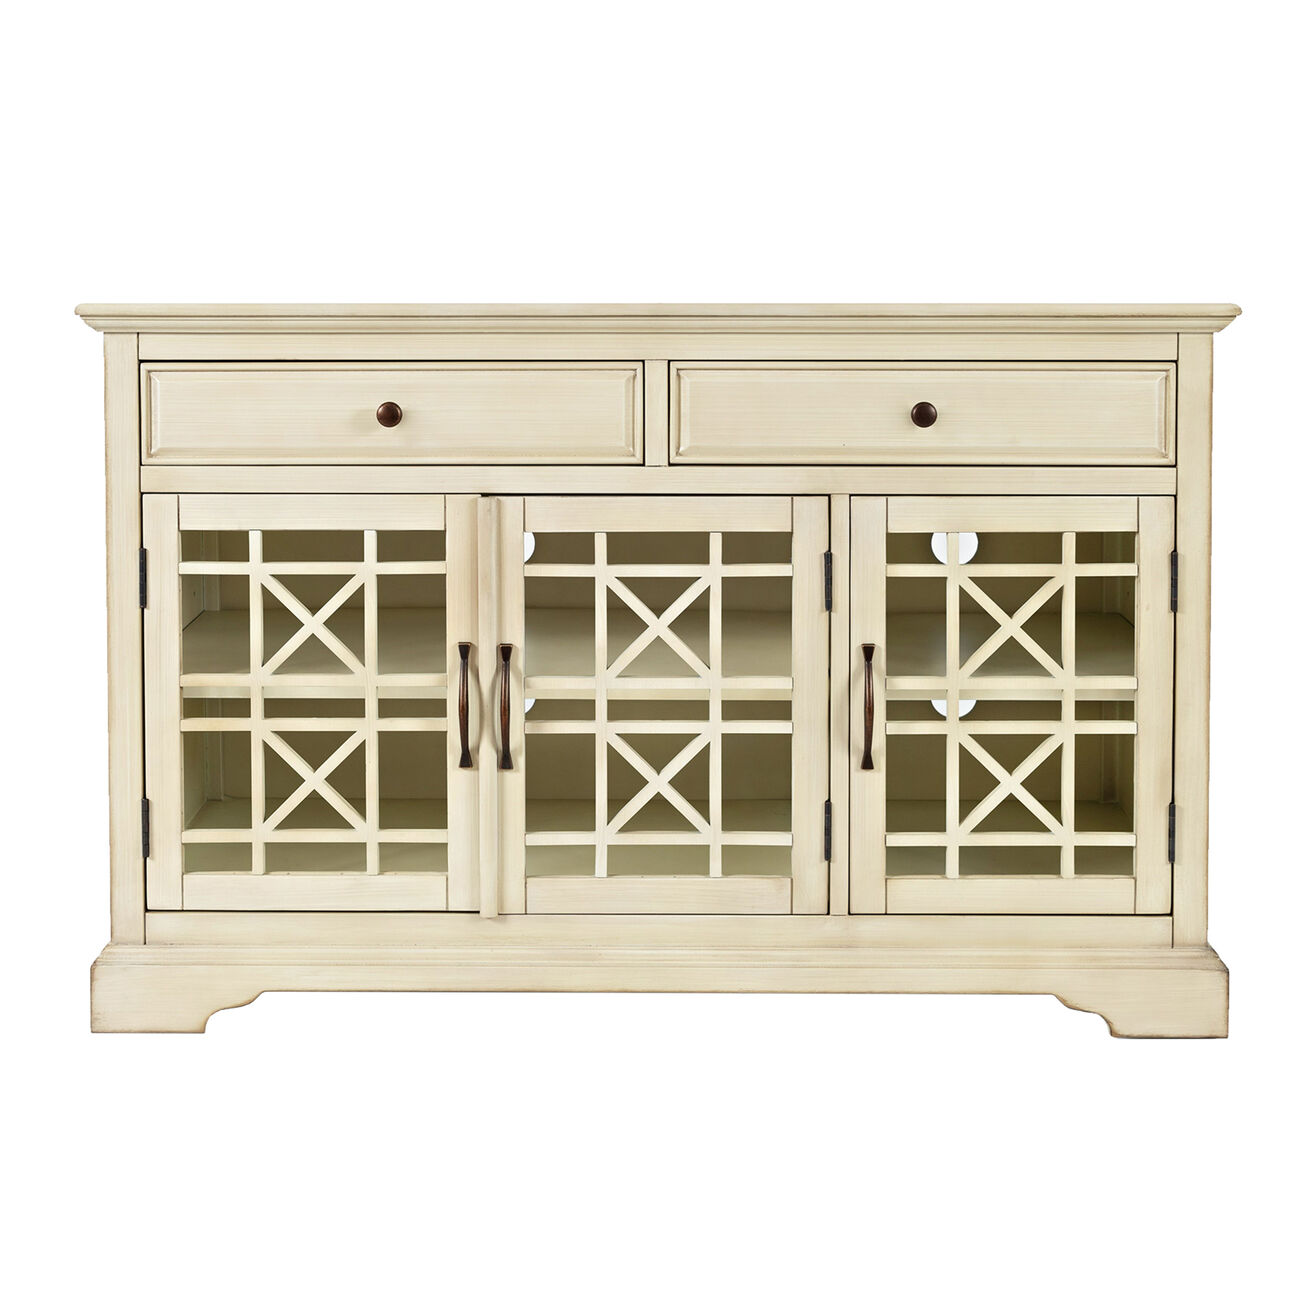 Wooden Media Unit with 2 Drawers and 3 Doors with X Motif Details, Cream 